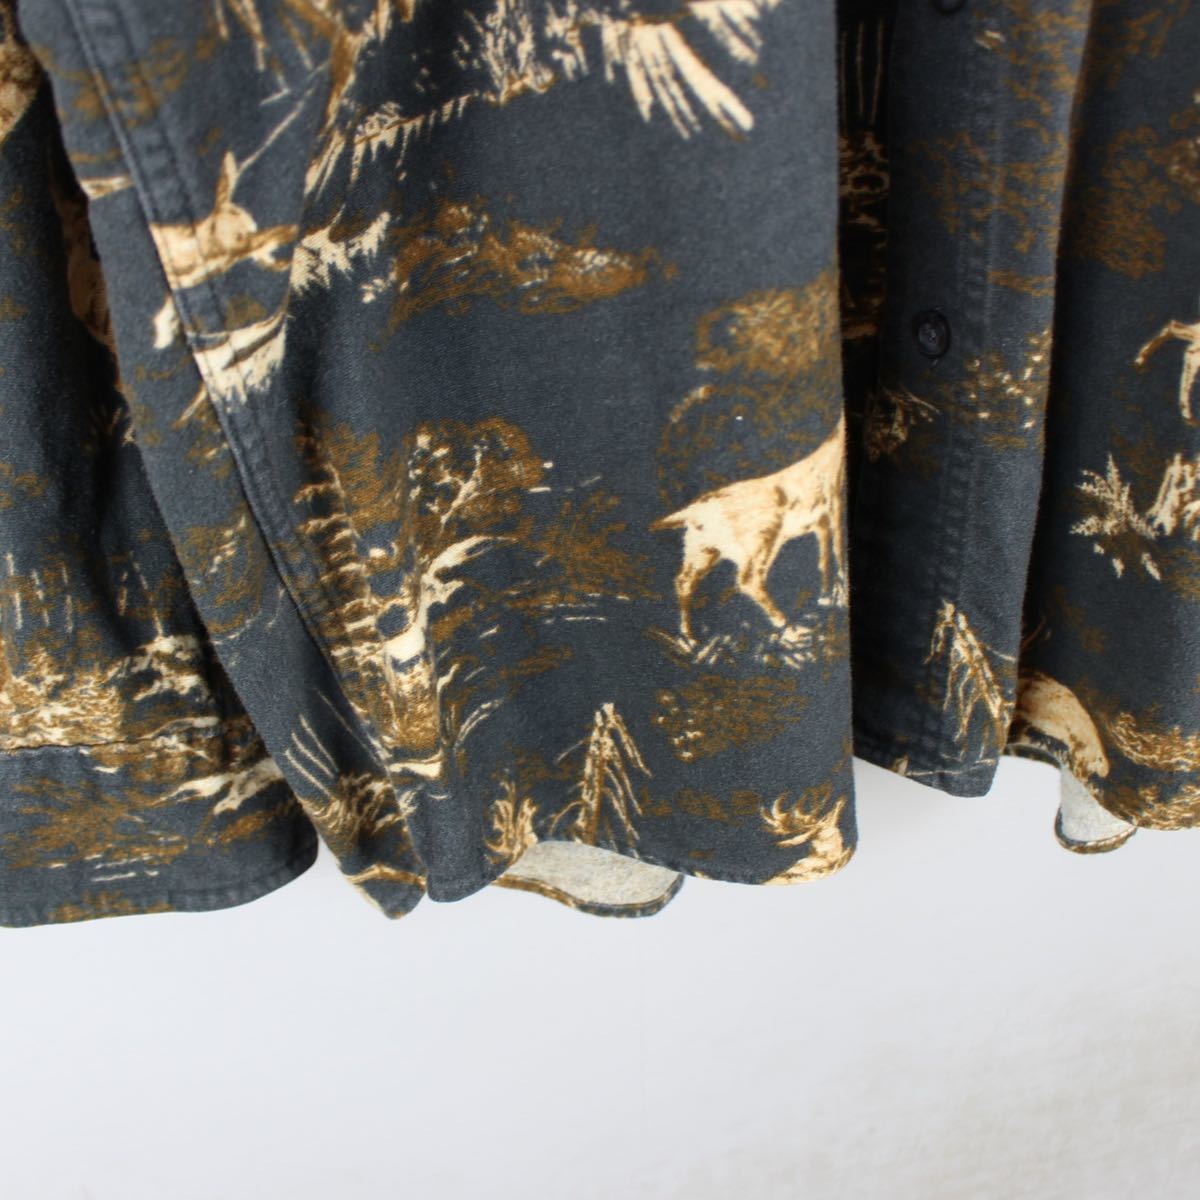 USA VINTAGE WOOL RICH DEER PATTERNED LONG SLEEVE SHIRT/アメリカ古着ウールリッチ鹿柄長袖シャツ_画像4